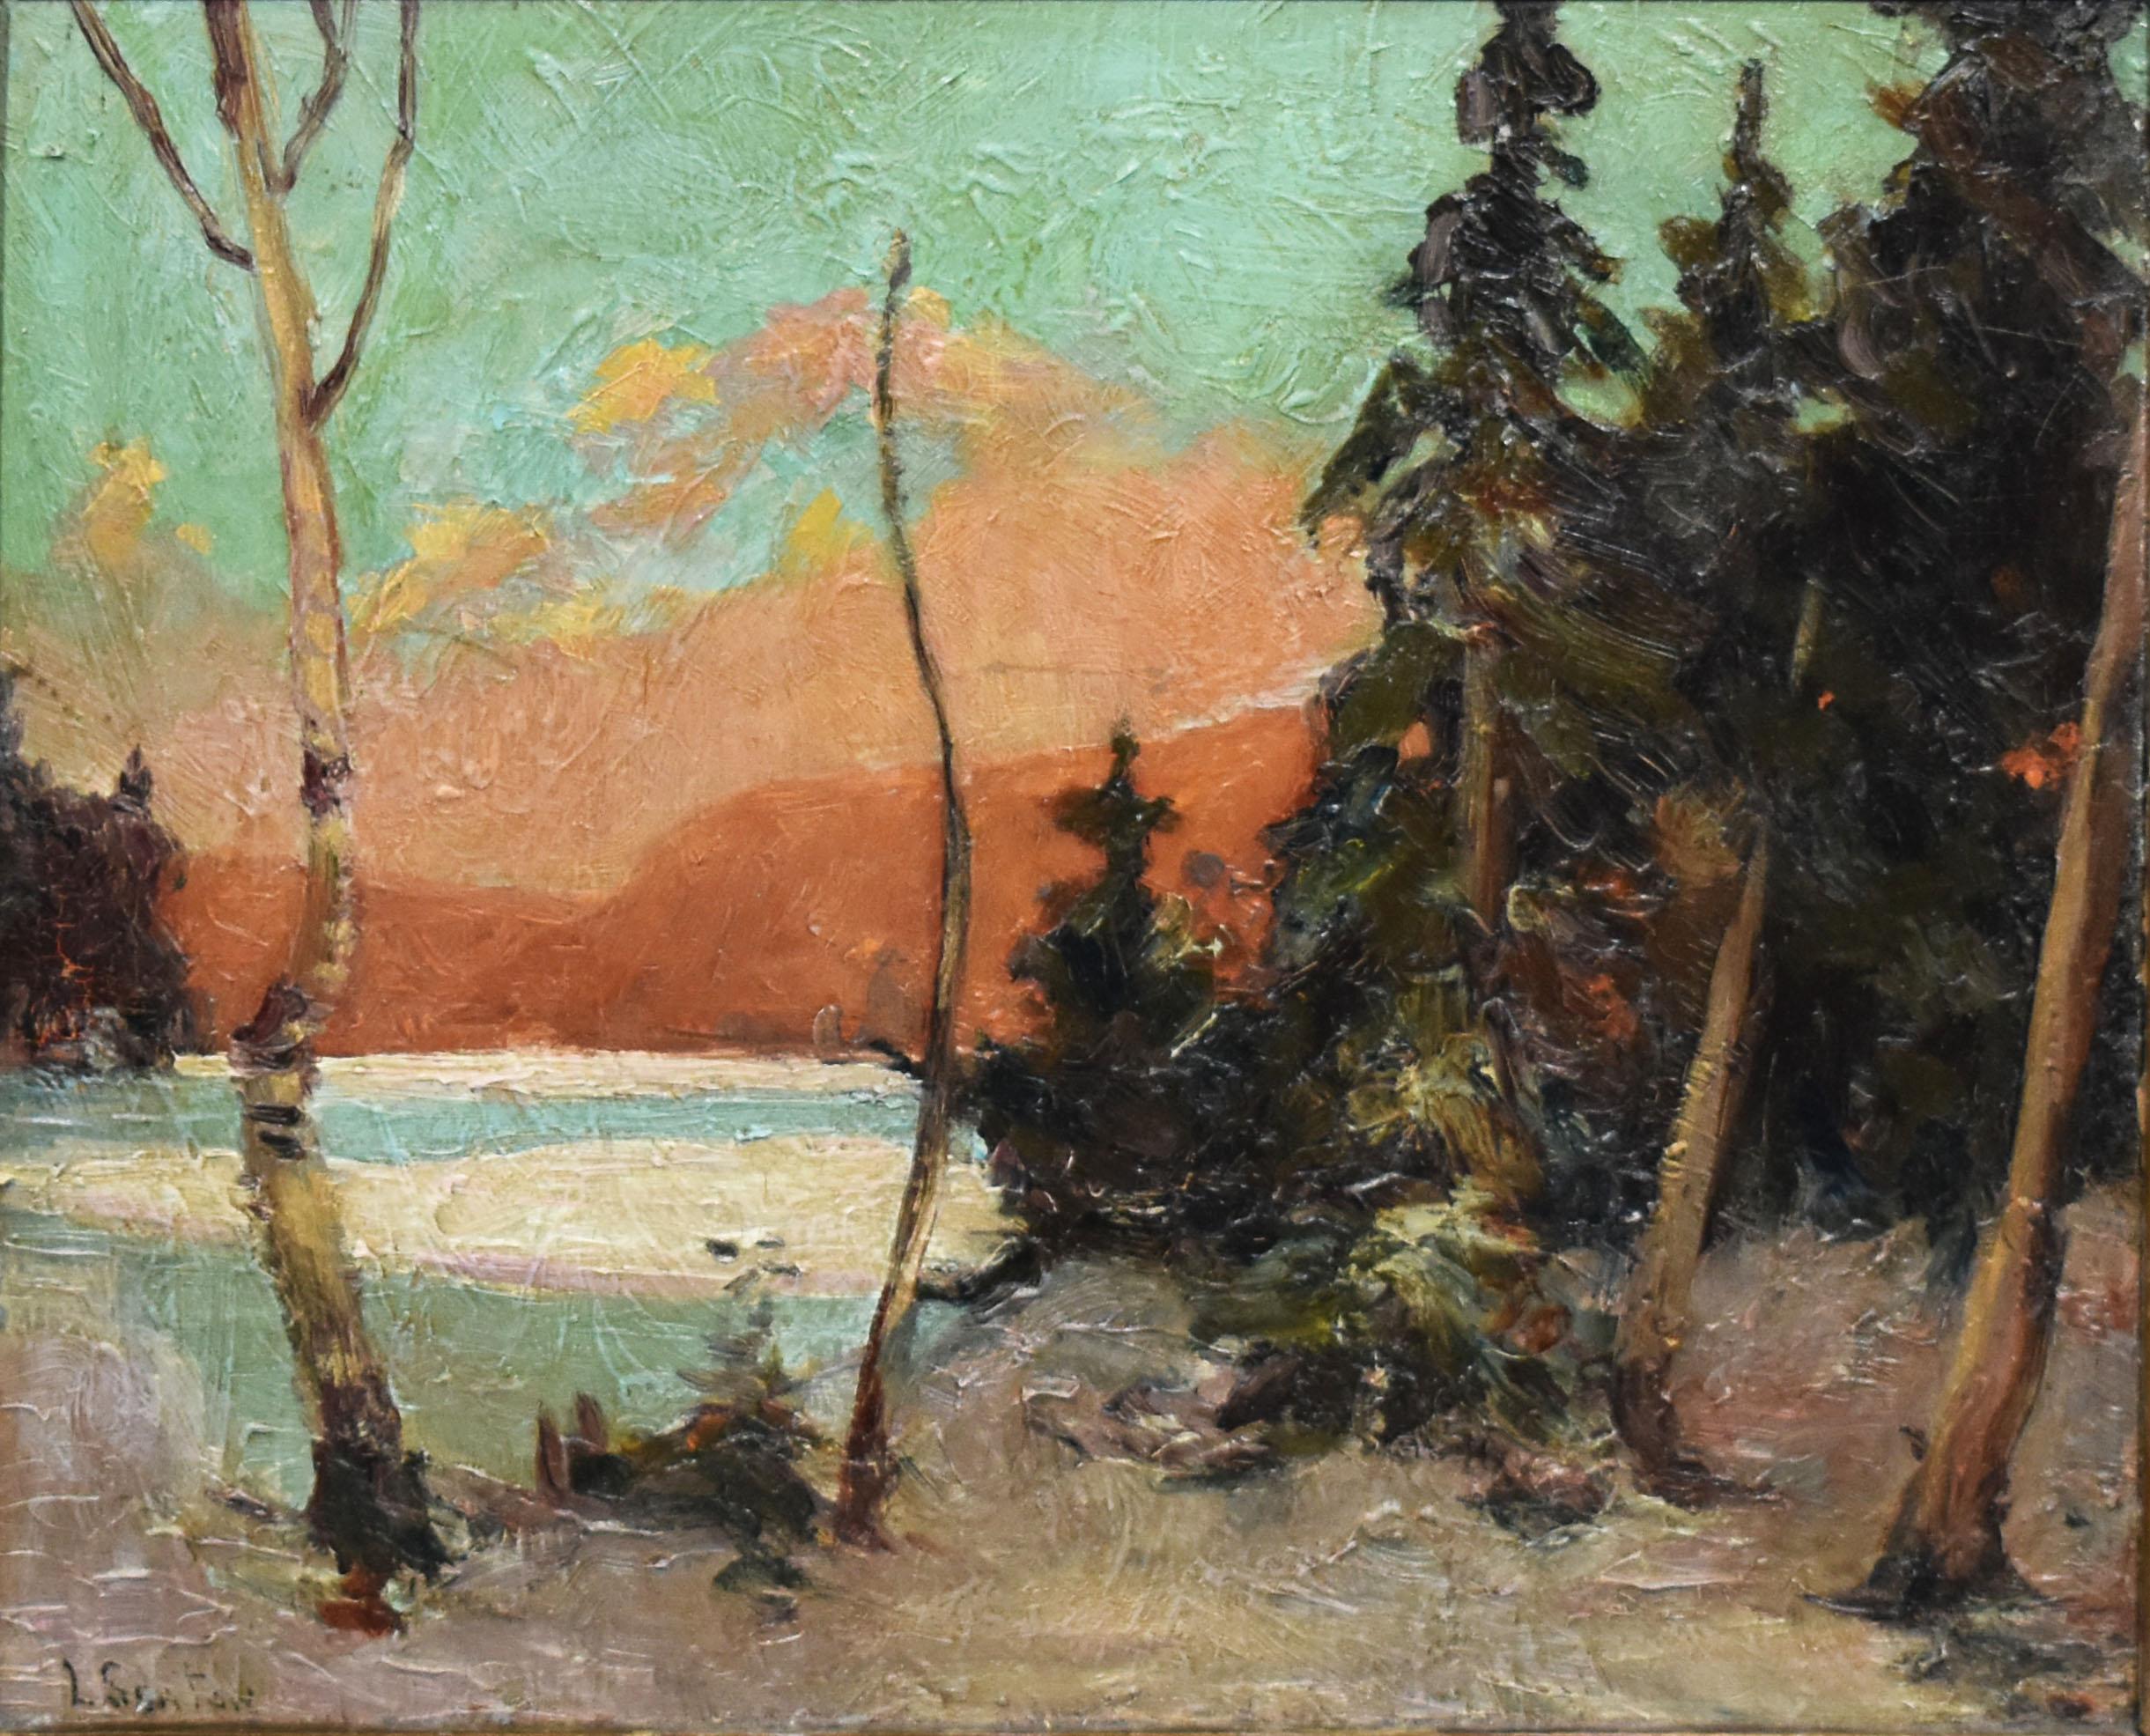 Antique impressionist winter landscape painting.   Oil on board, circa 1900.  Signed lower left.  Displayed in a period giltwood frame.  Image size, 13.5